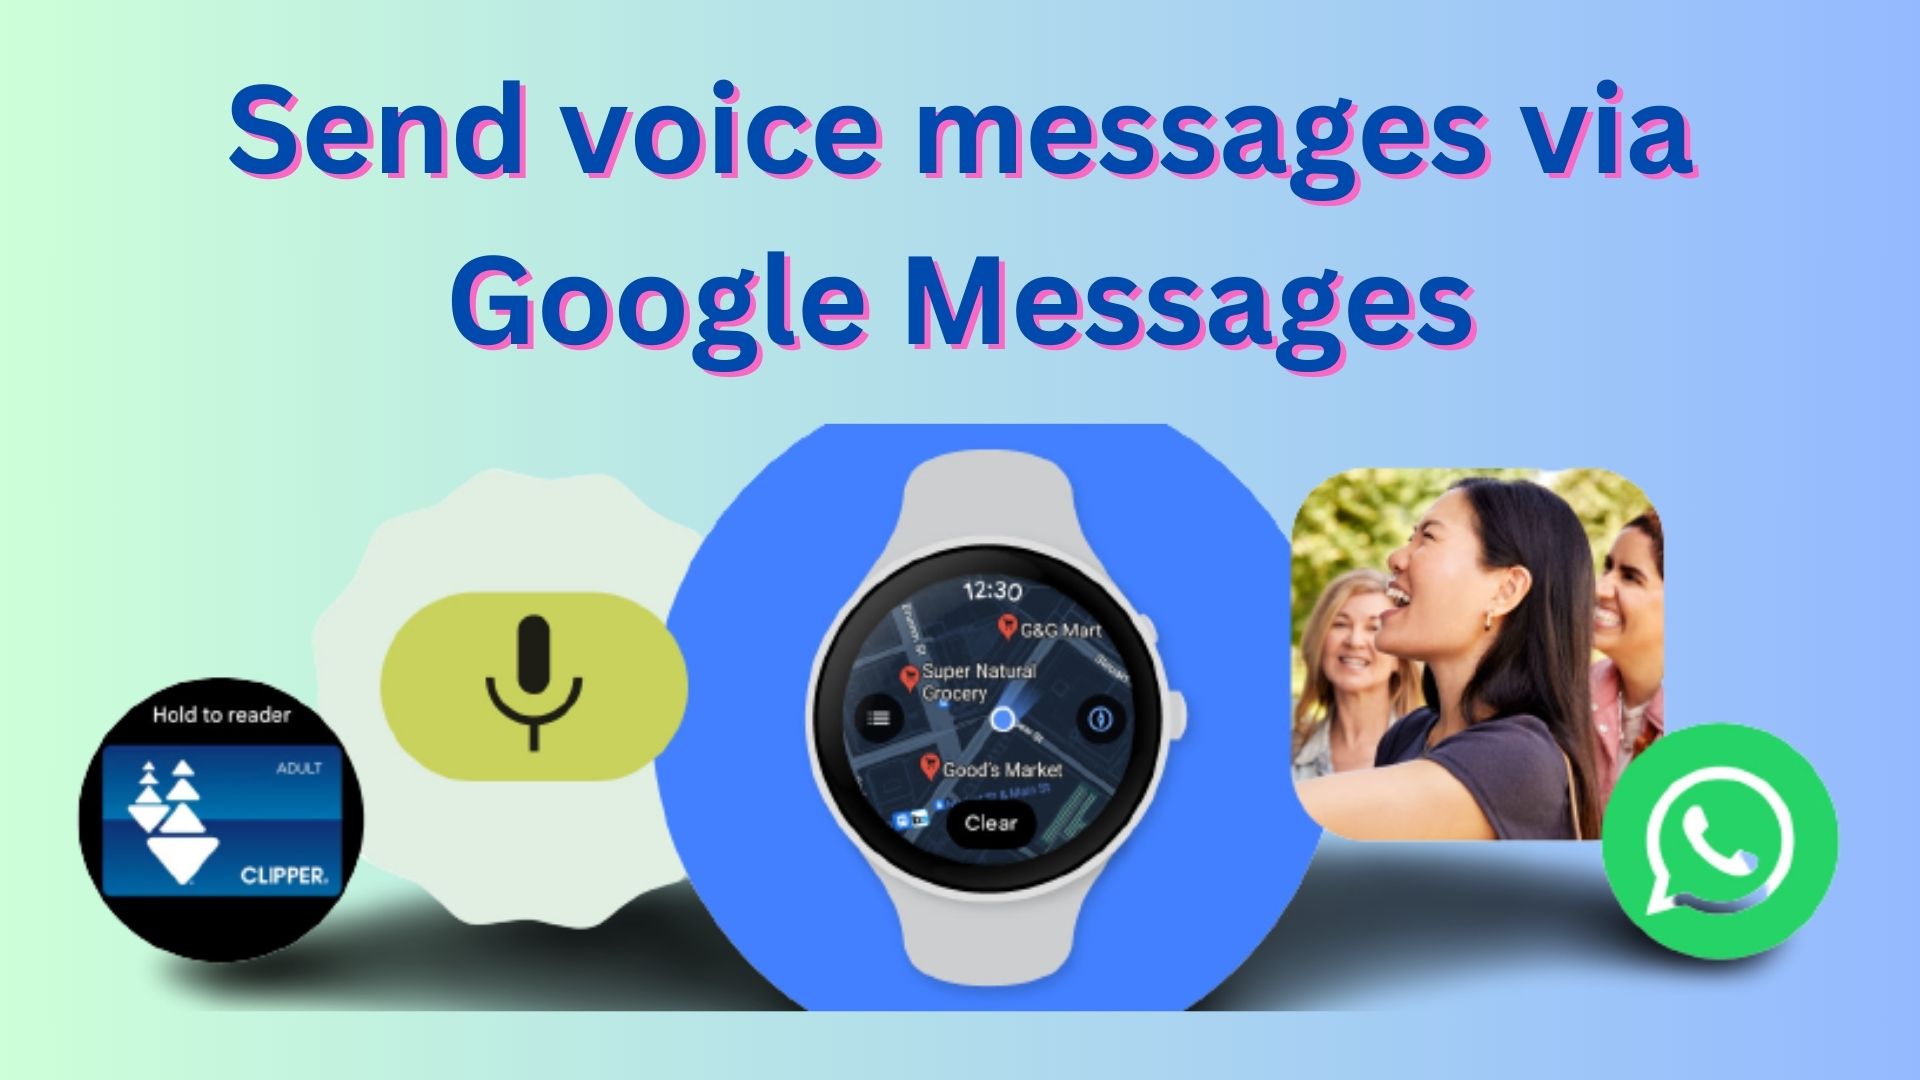 How to send voice messages in Google Messages on Wear OS smartwatches